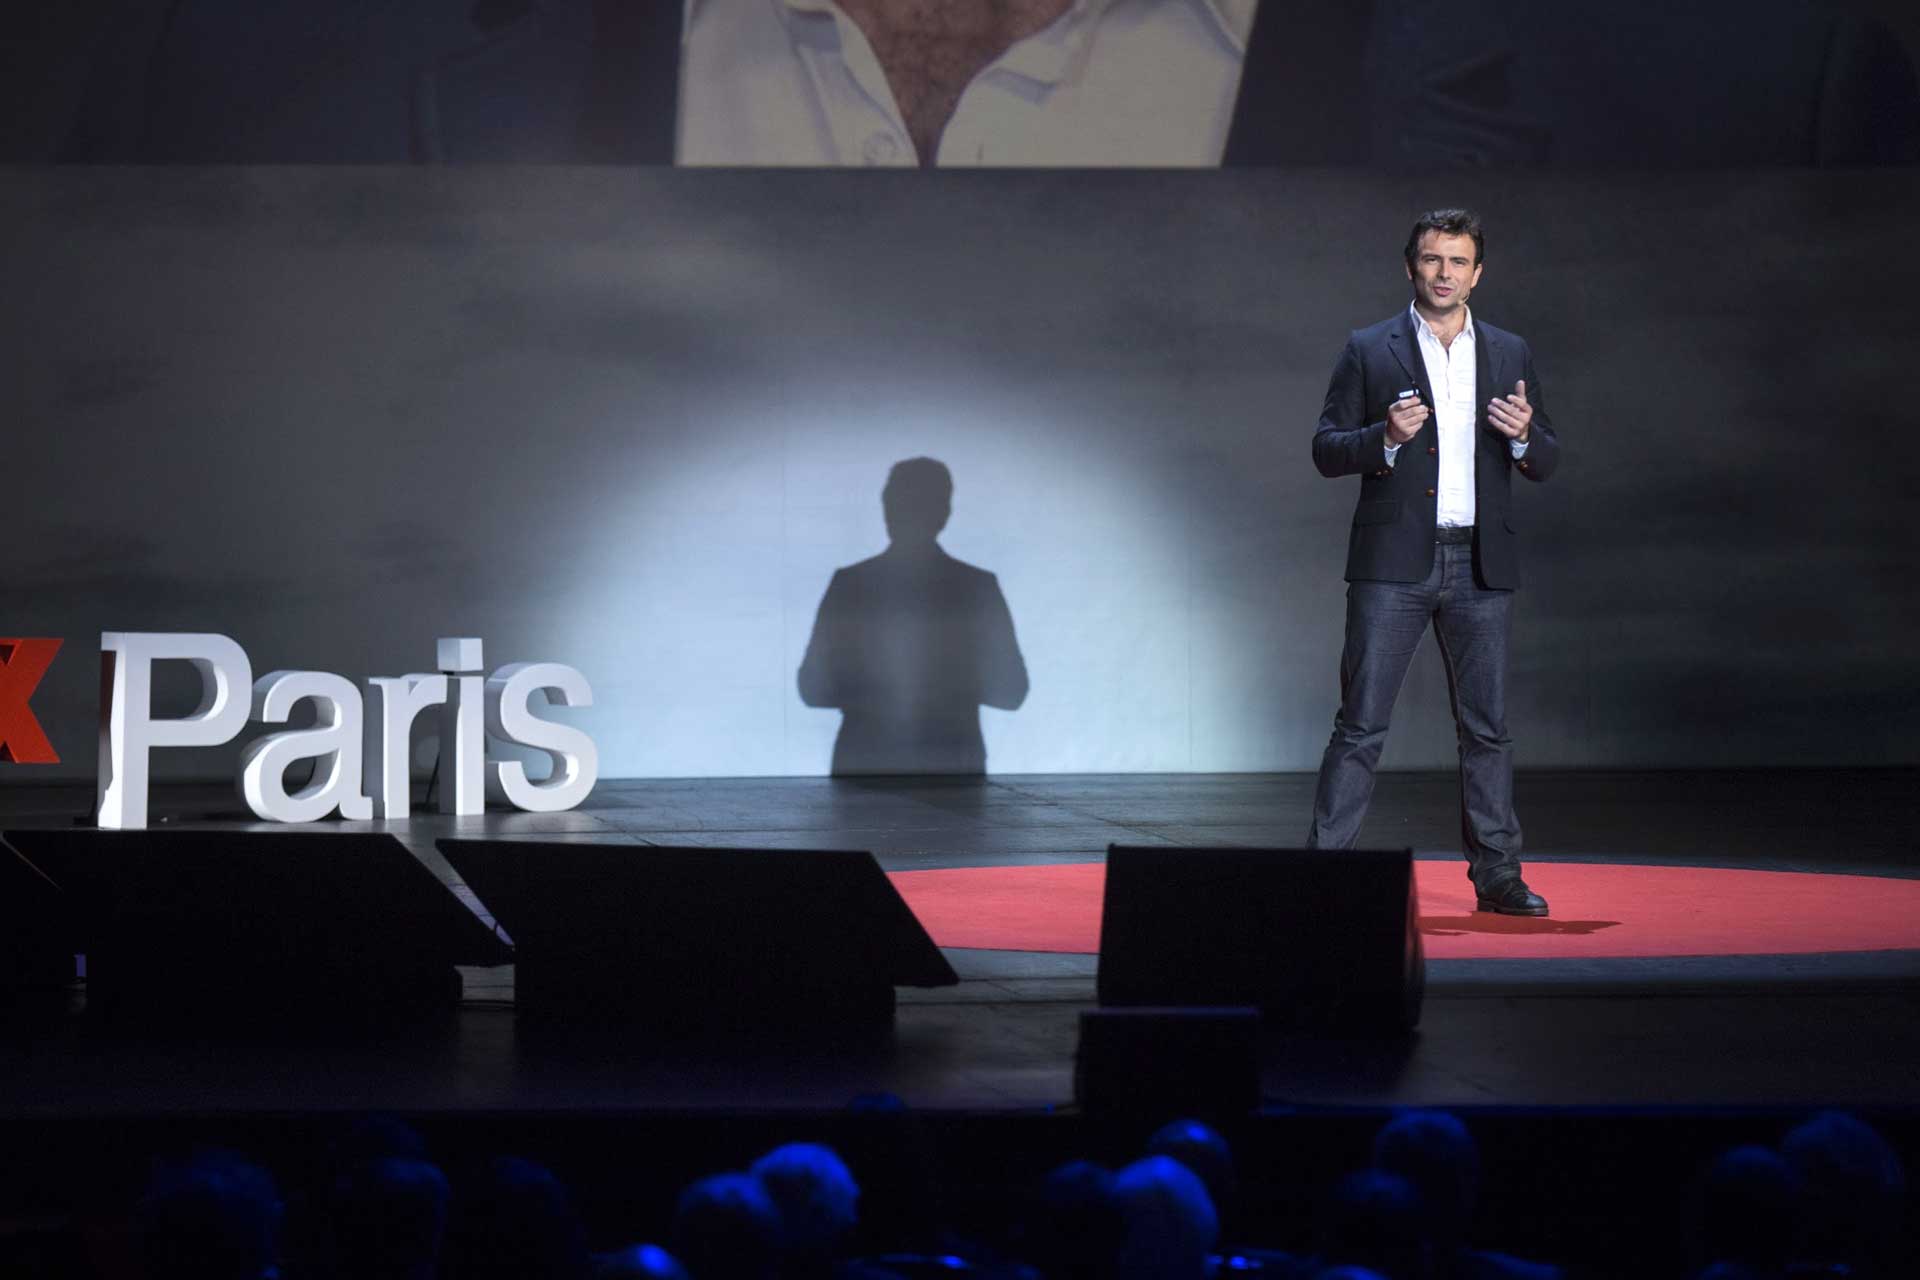 conference-TEDxParis-2014-22.jpg